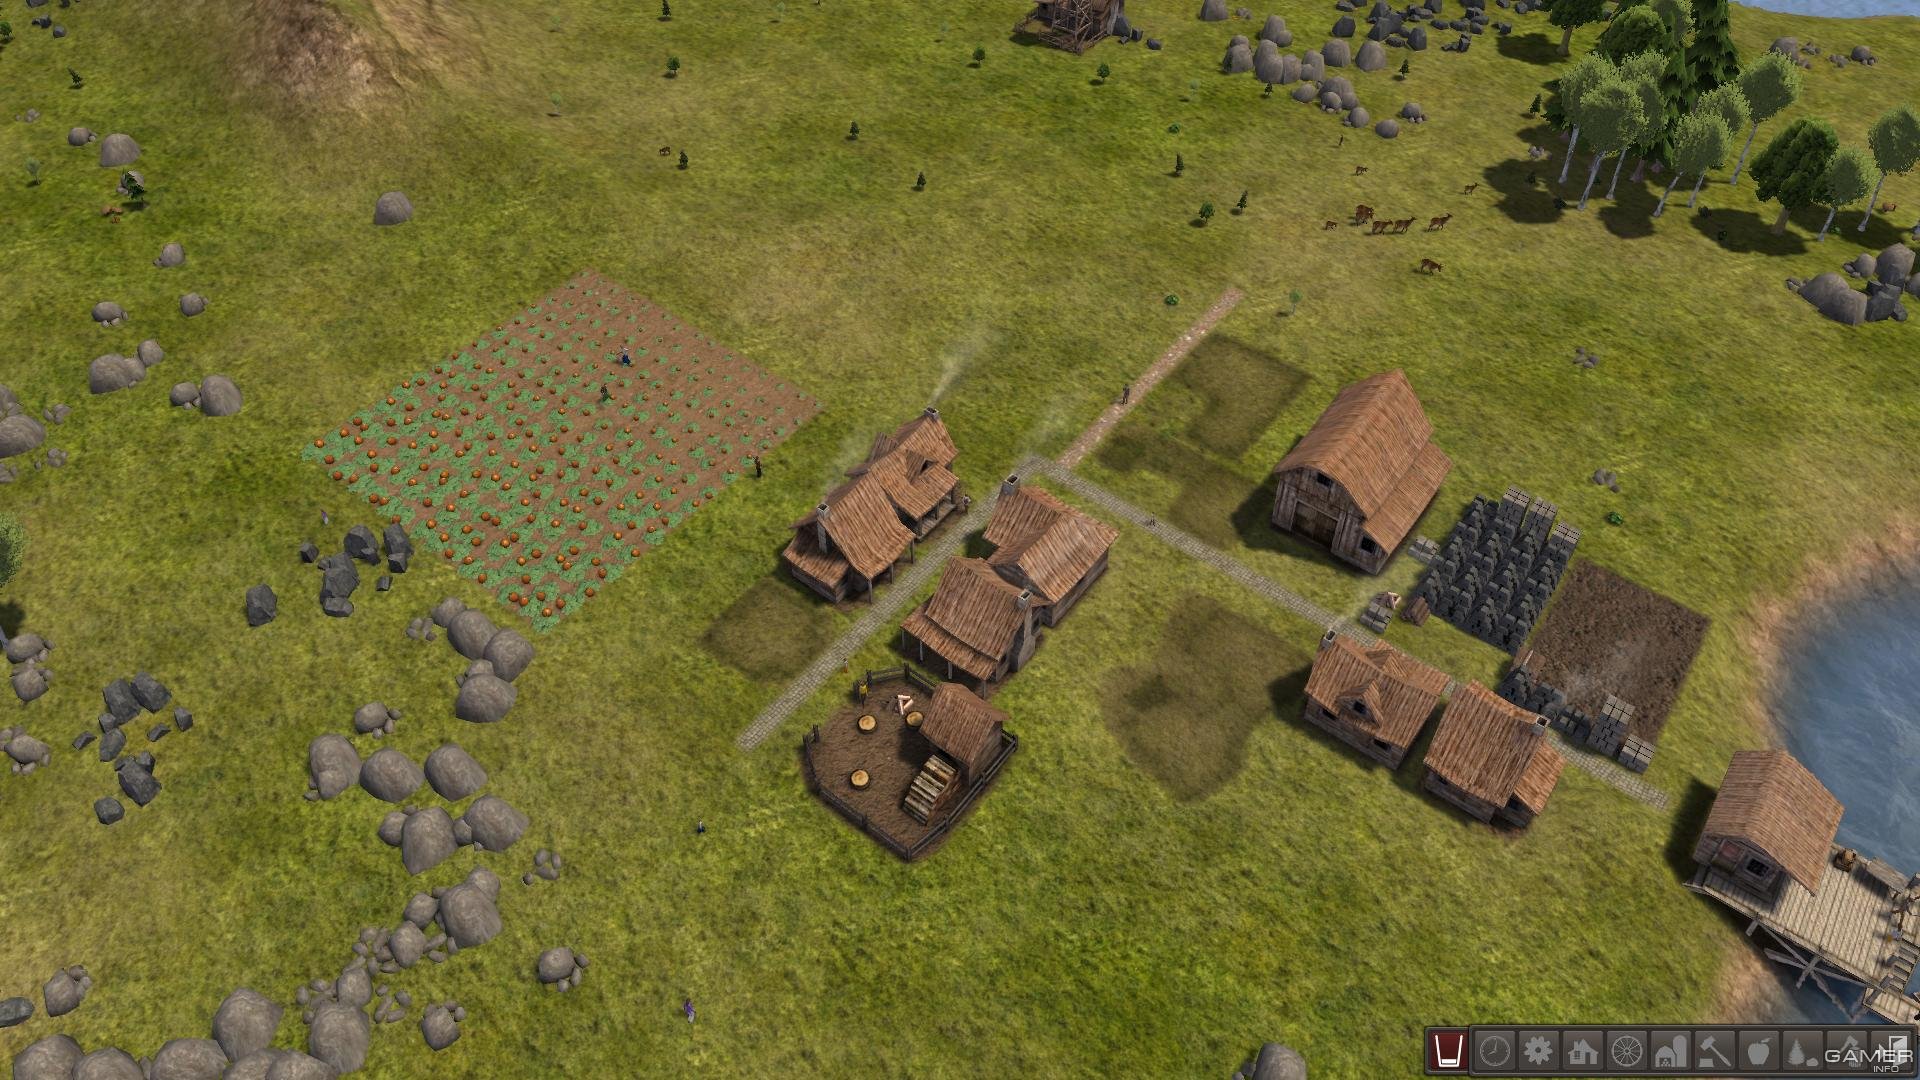 banished free online game